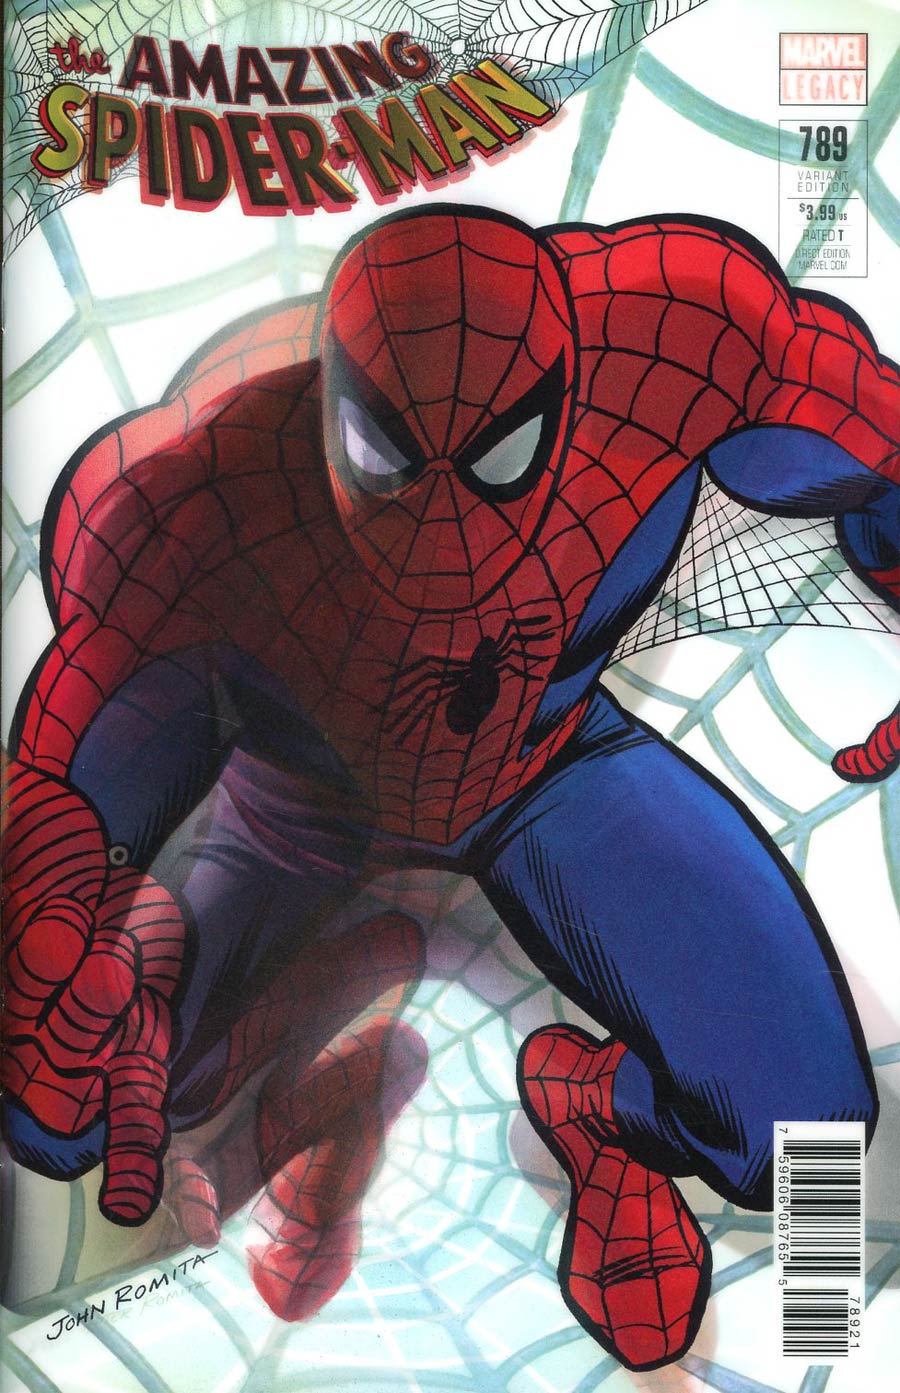 Amazing Spider-Man Vol 4 #789 Cover B Variant Alex Ross Lenticular Homage Cover (Marvel Legacy Tie-In)